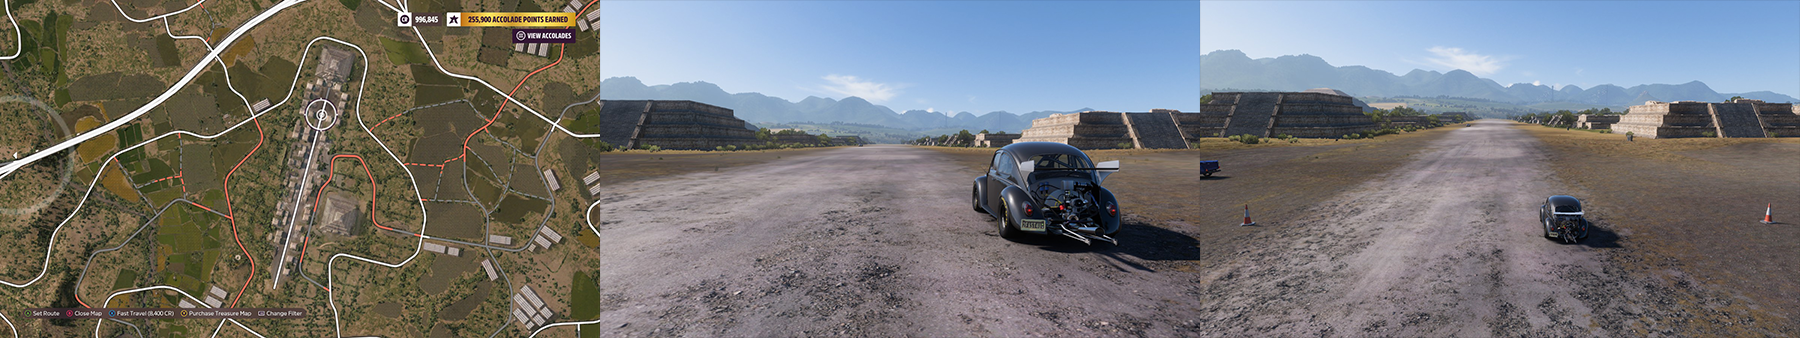 Forza Horizon 5 Tips & Trick for Drag Racer - NHRA would approve this as a Drag venue - 3F6C21F